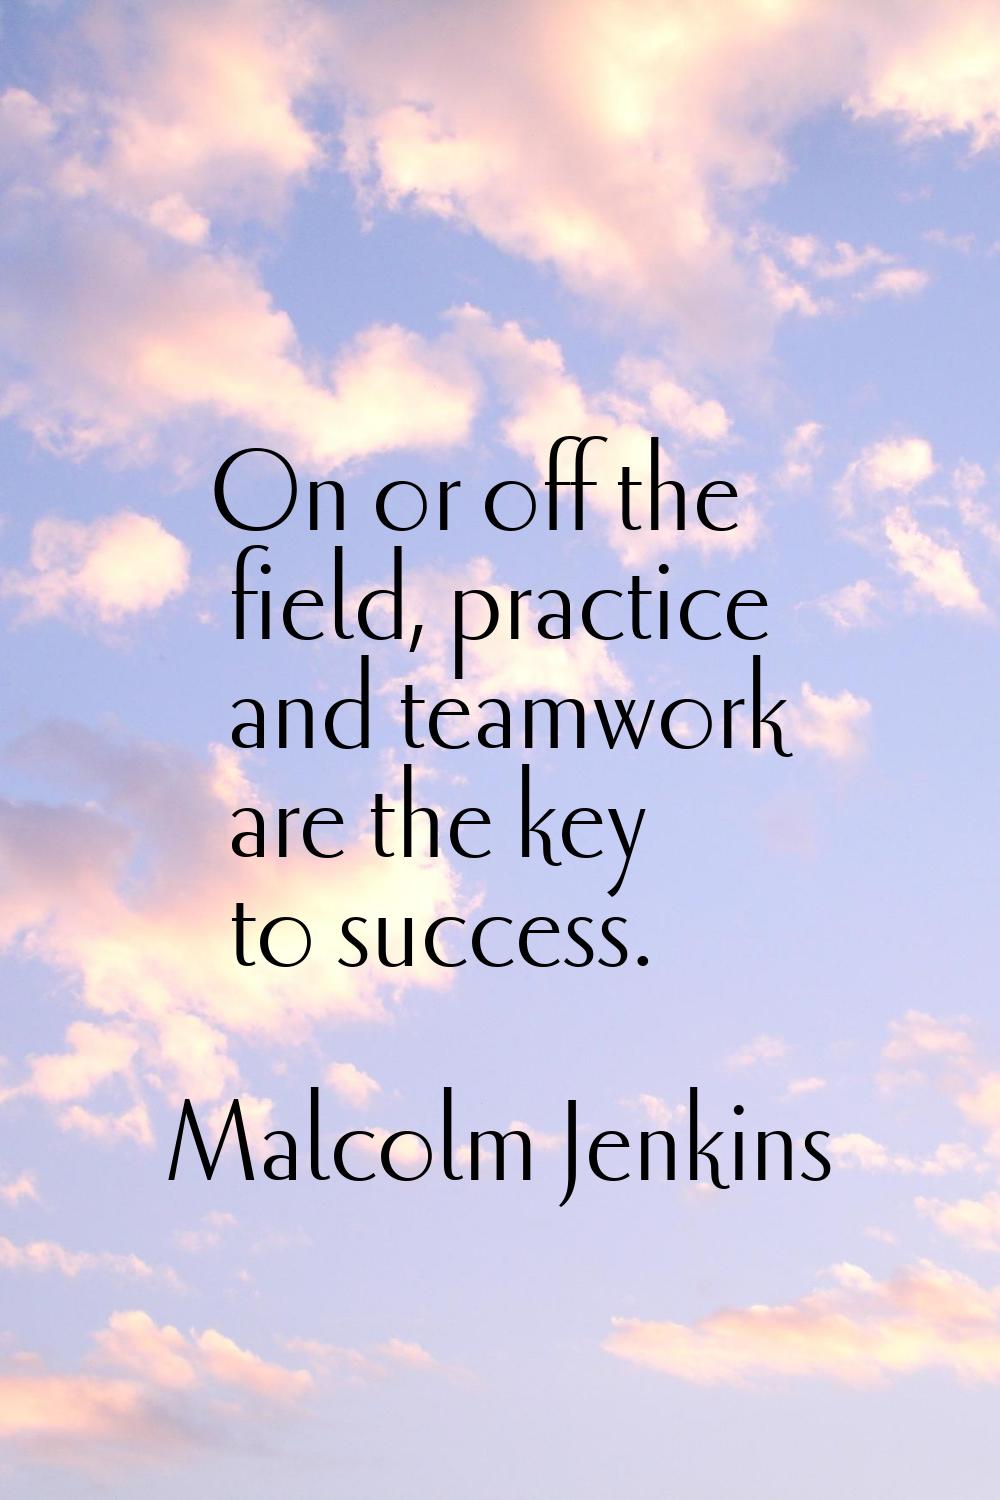 On or off the field, practice and teamwork are the key to success.